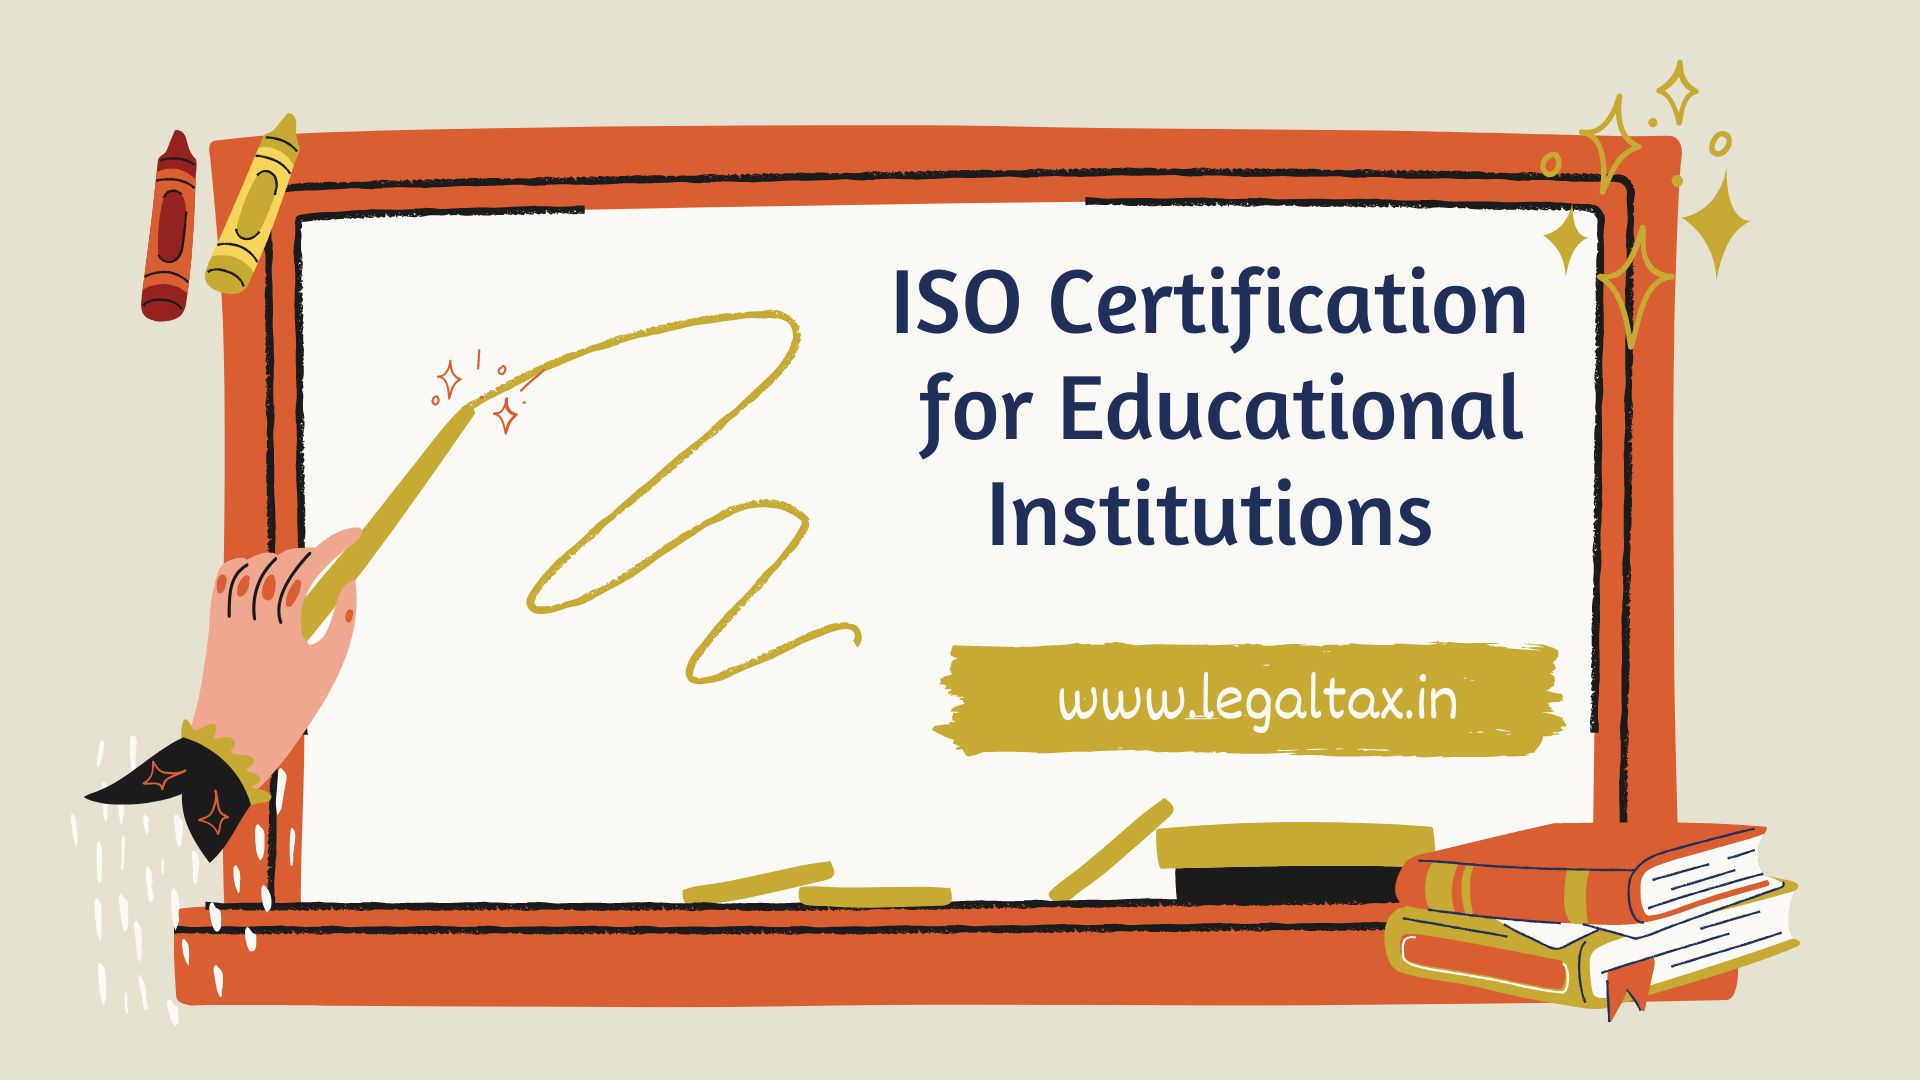 ISO Certification for Educational Institutions